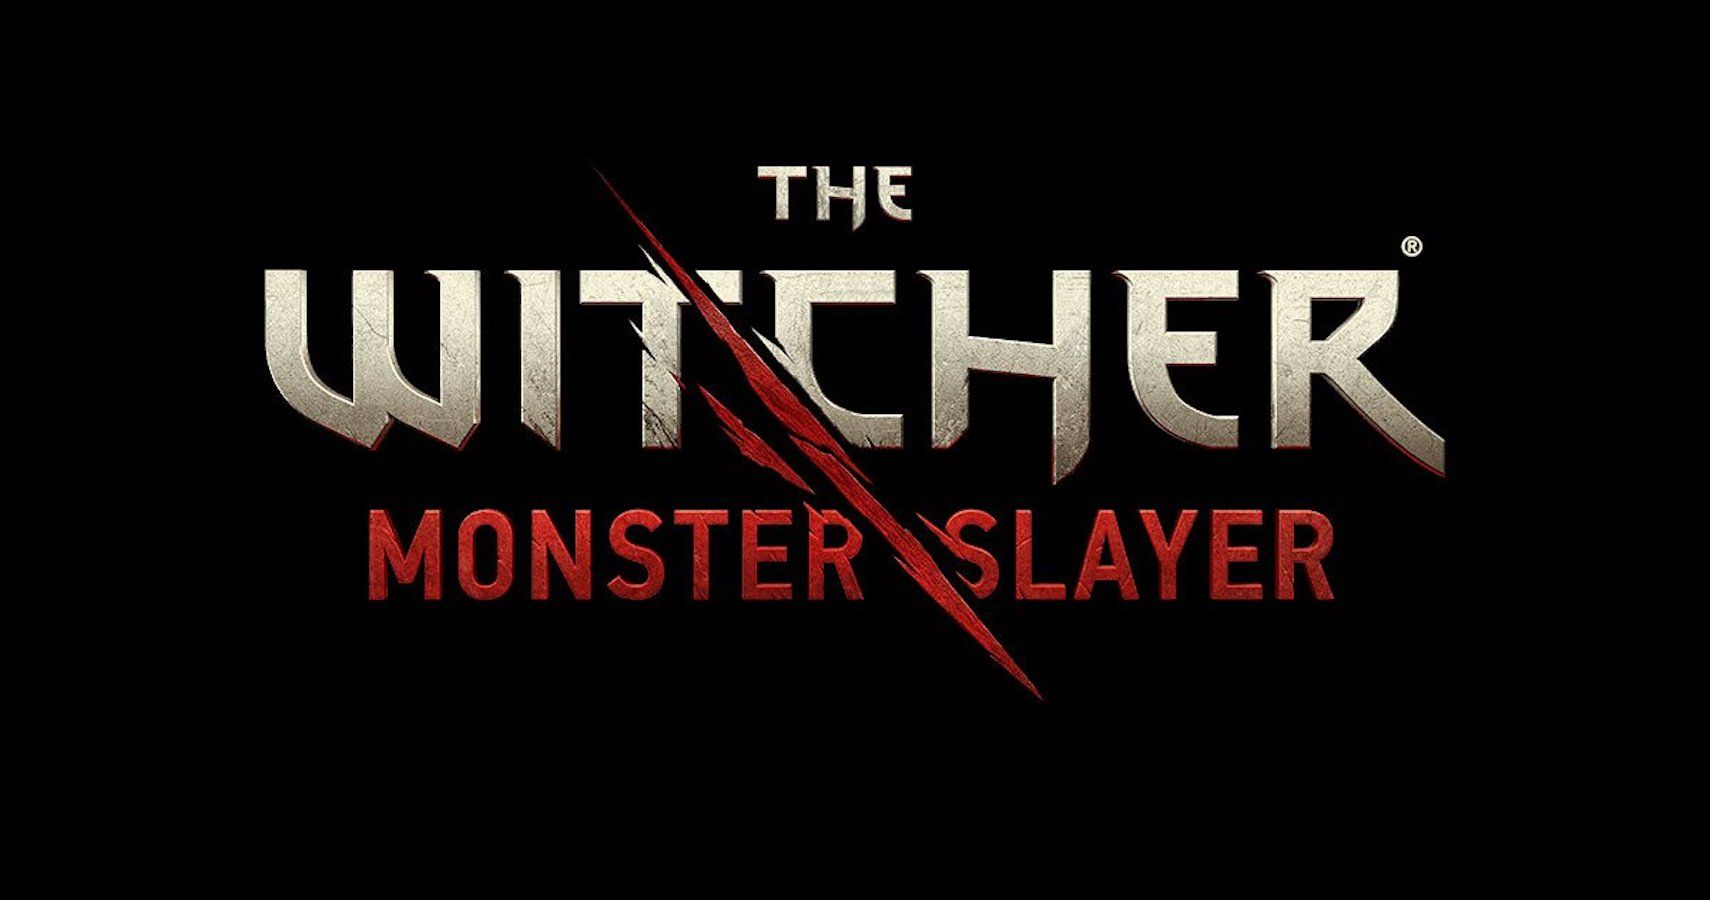 The Witcher Monster Slayer